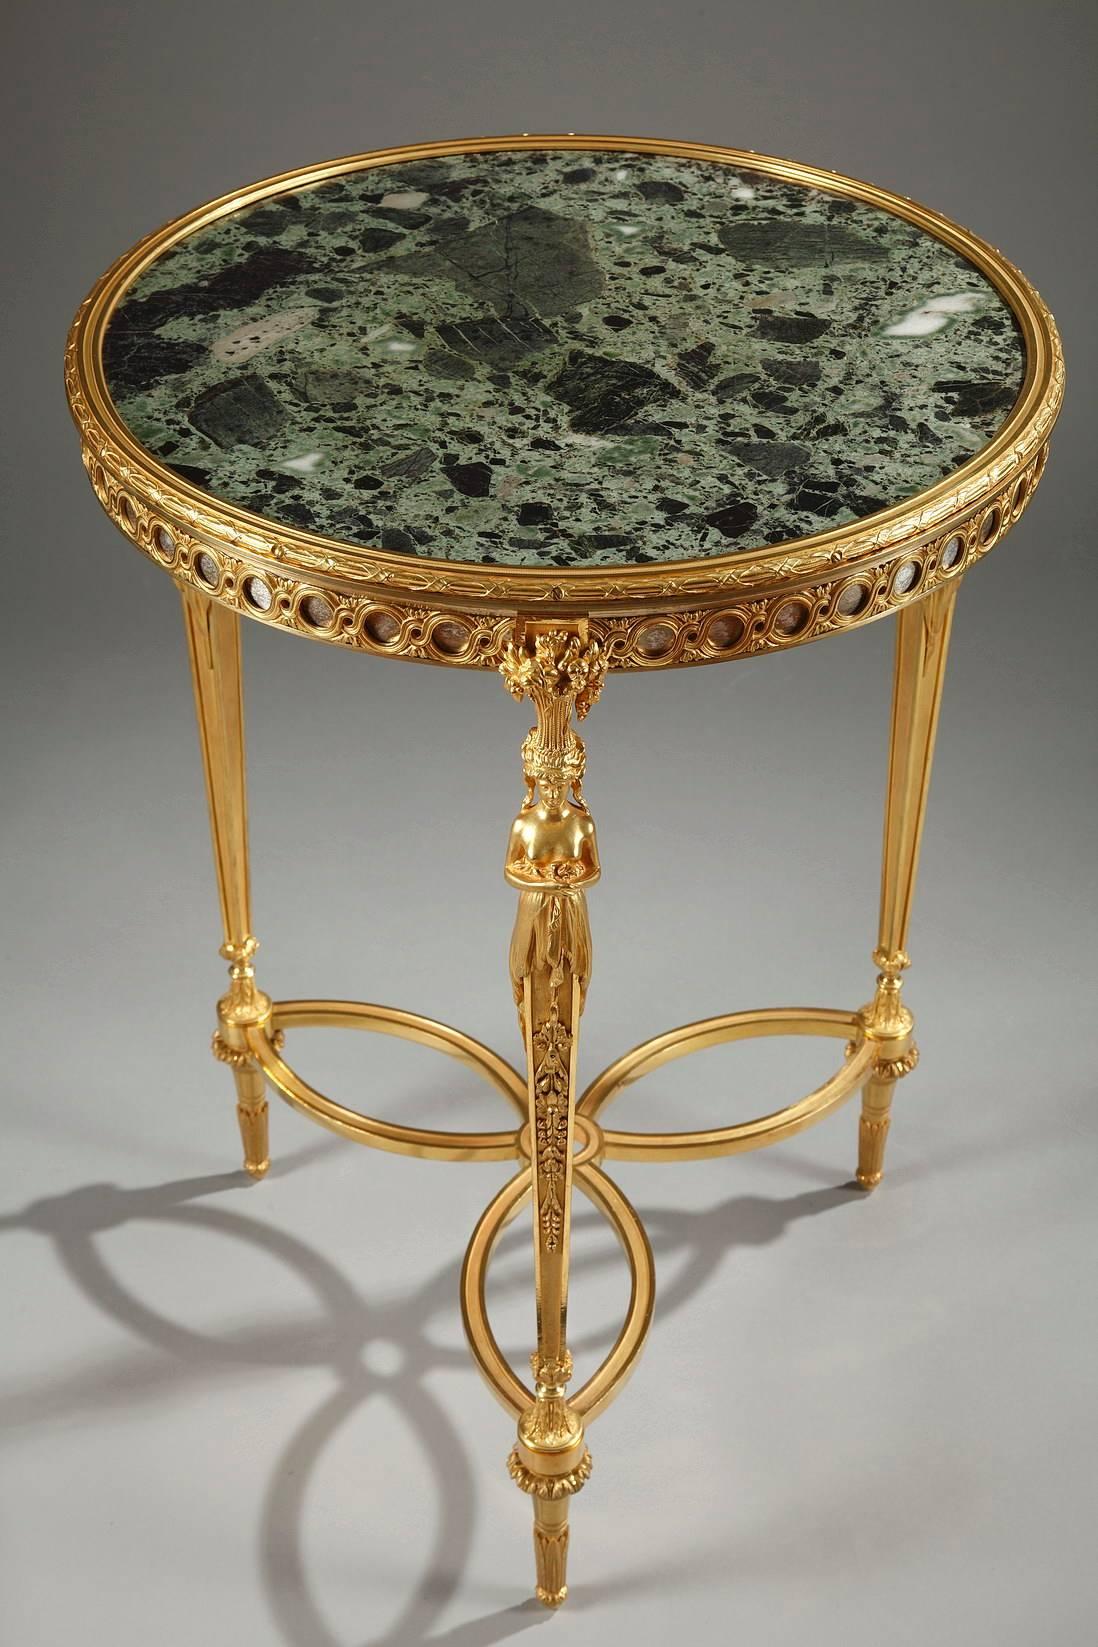 French 19th century gueridon in Adam Weisweiler taste, featuring a round, green, vert de mer marble tray and three graceful legs. The marble top is framed in gilt bronze, which is over a ring of gilt bronze openwork foliage over red marble. The tops